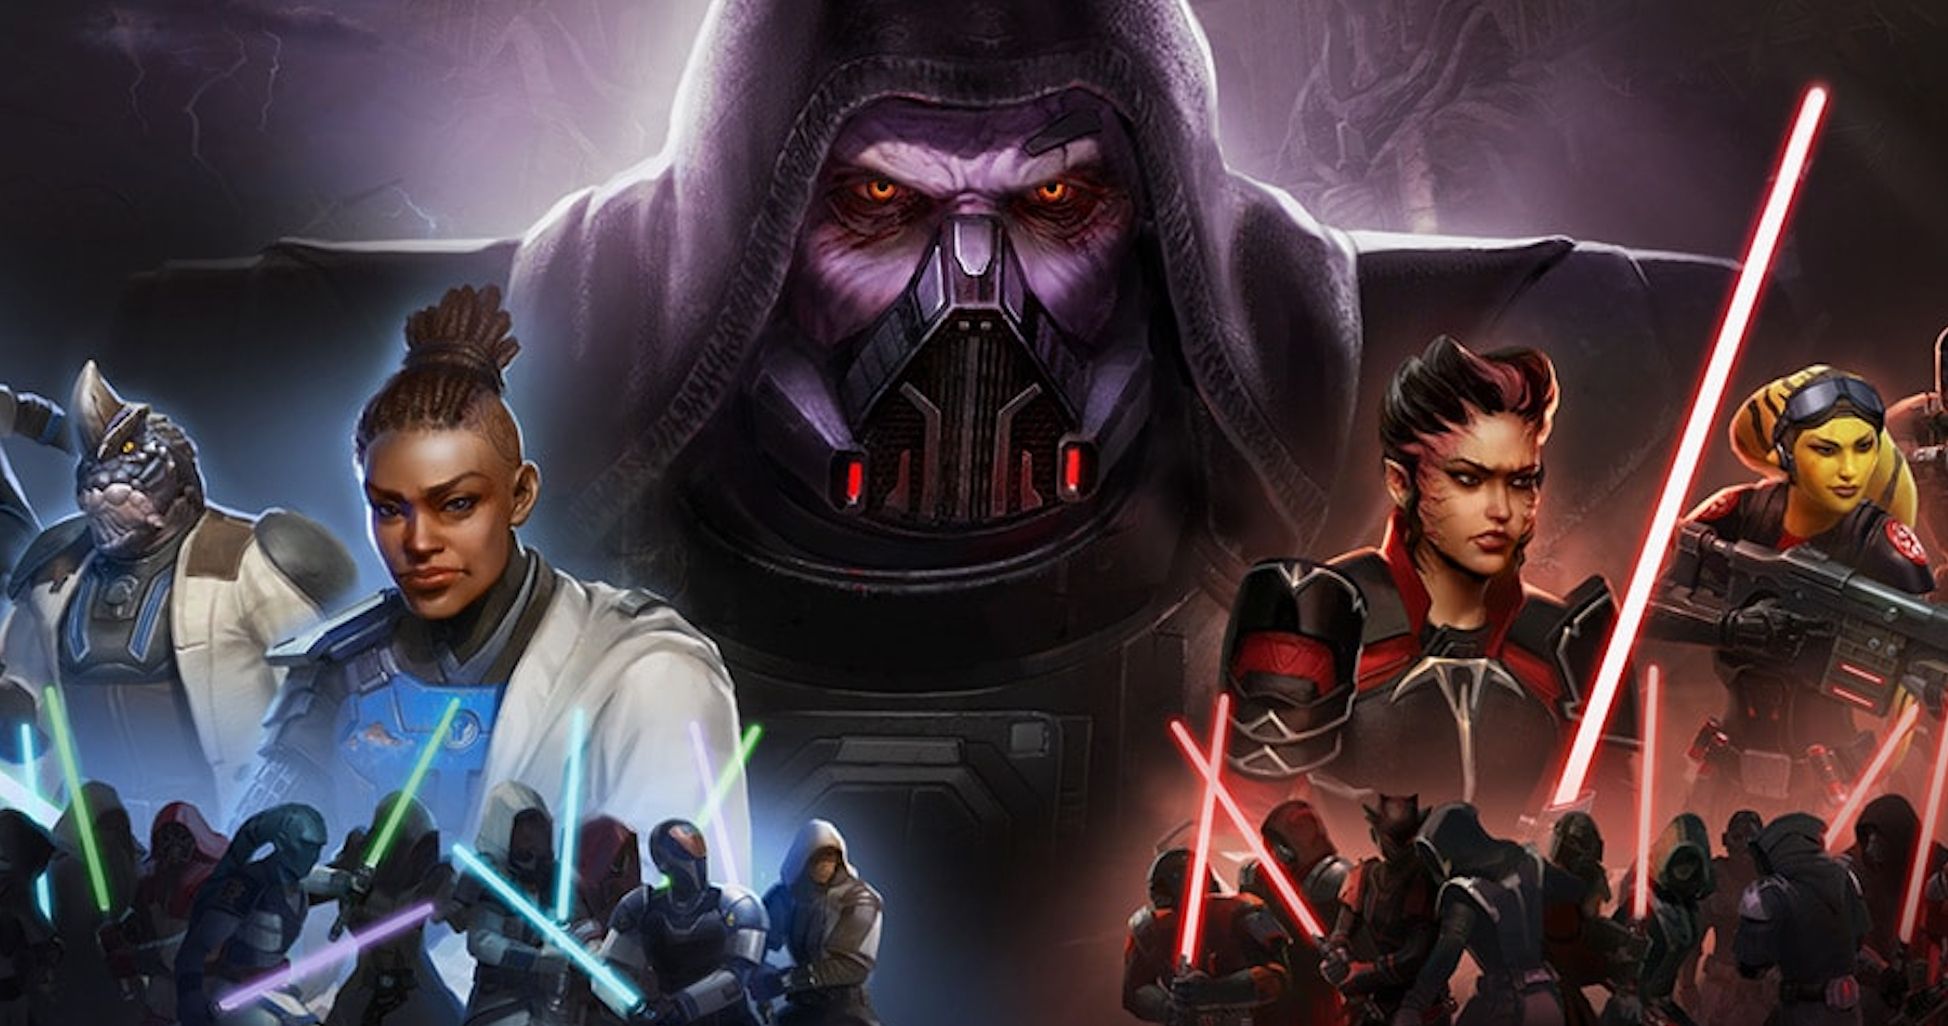 Star Wars: Knights of the Old Republic Video Game Remake Is Happening at Aspyr